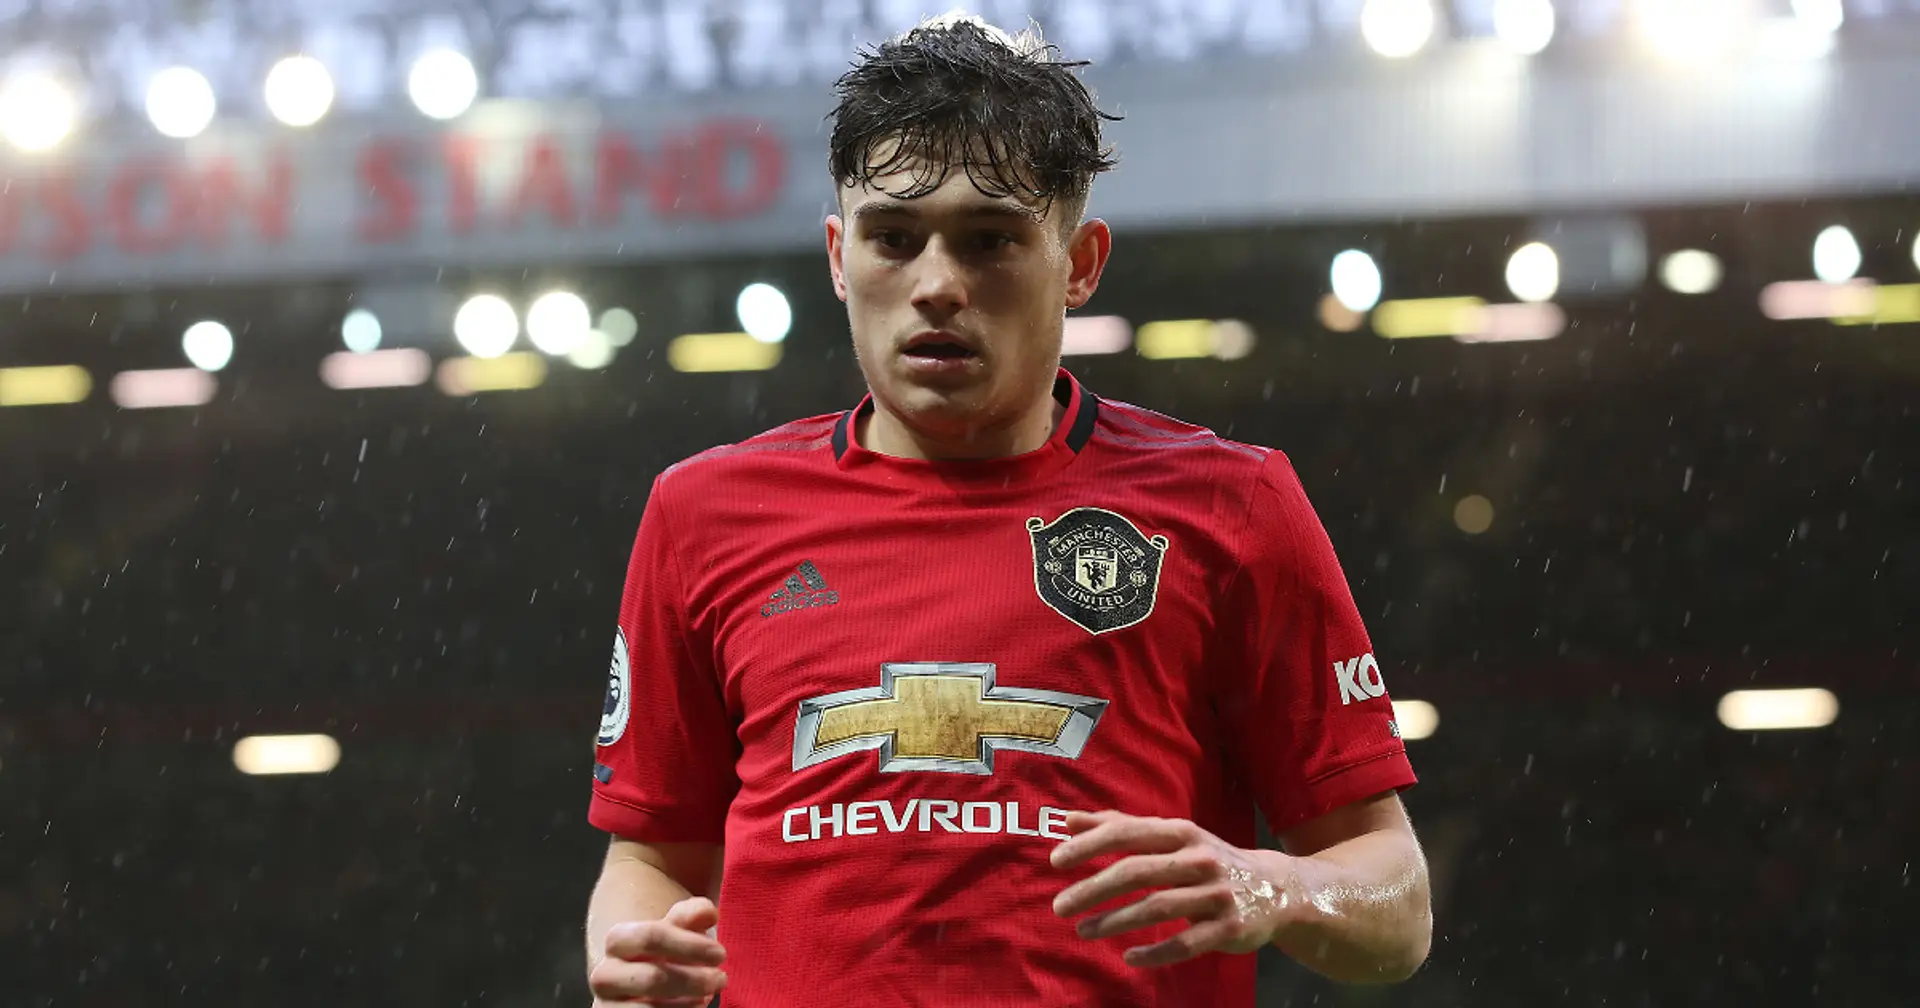 'Most wide players don't contribute crazy number of goals or assists': Man United fan wants Dan James to get more credit